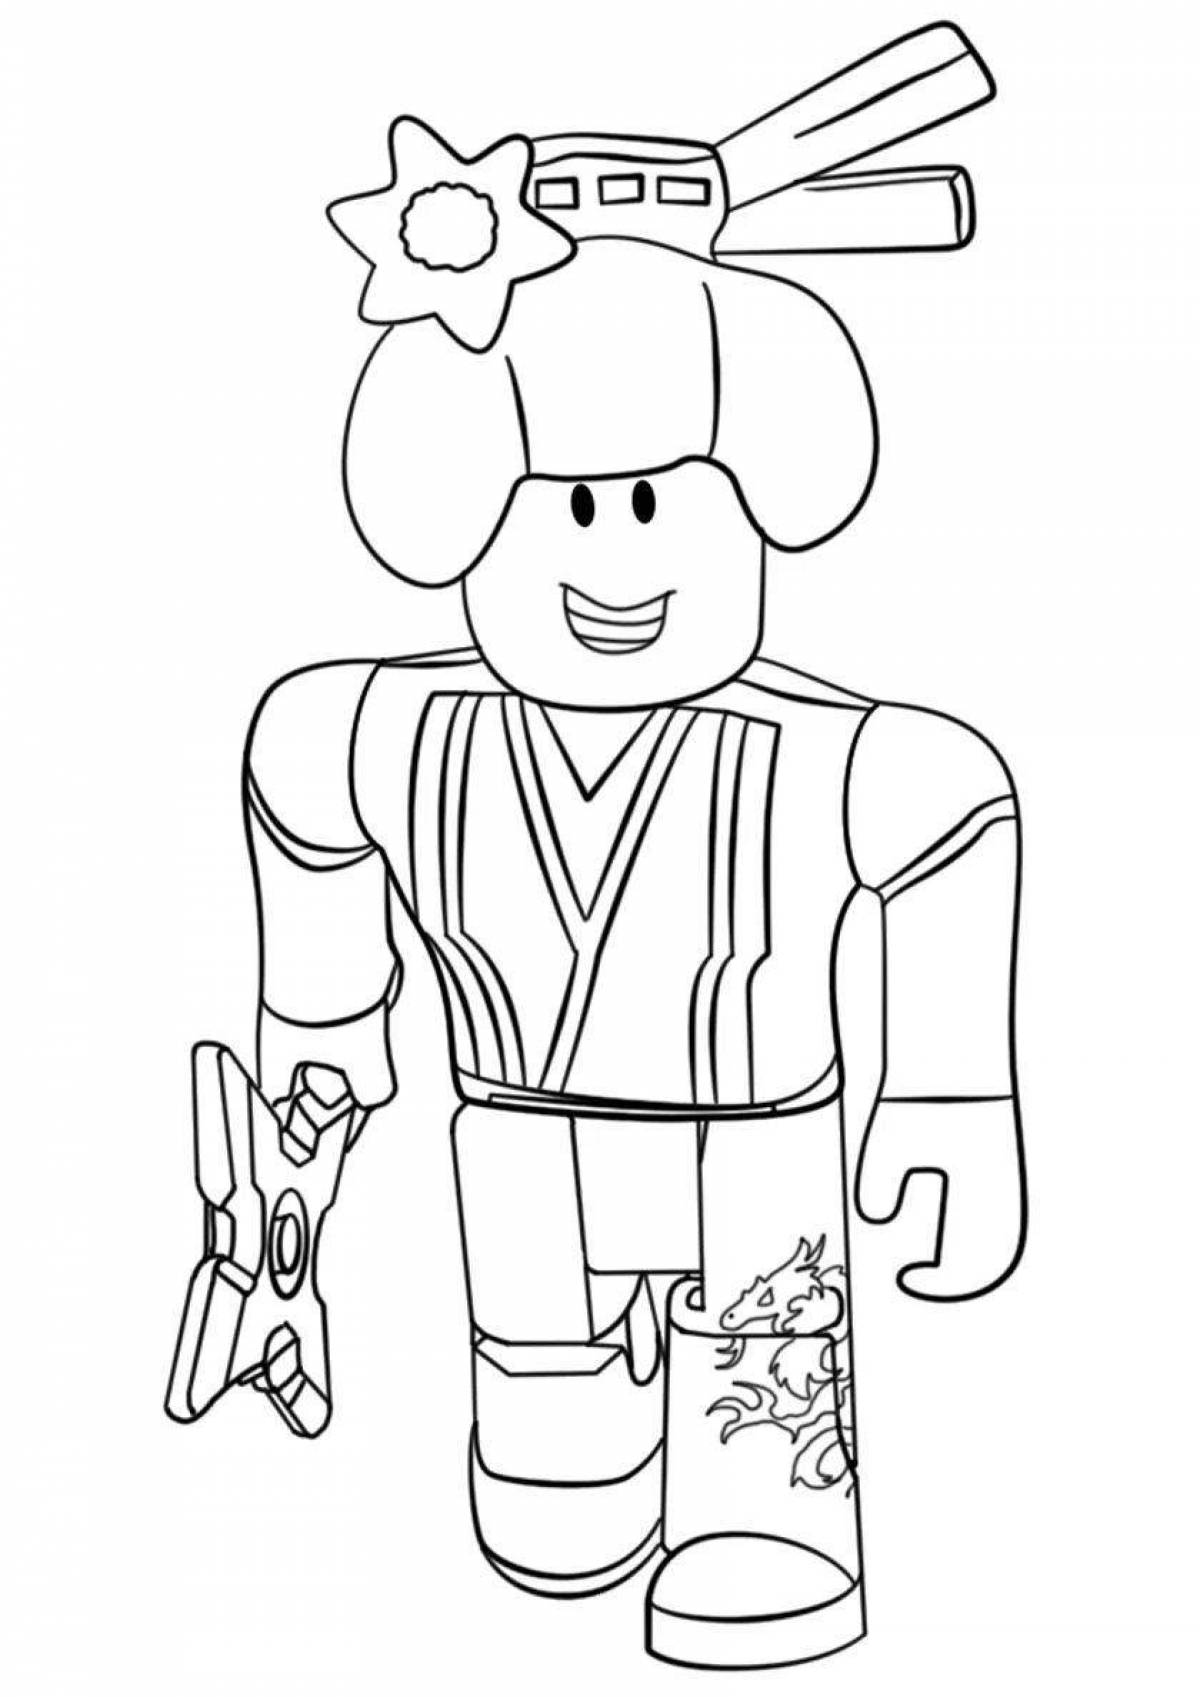 Roblox live characters coloring page